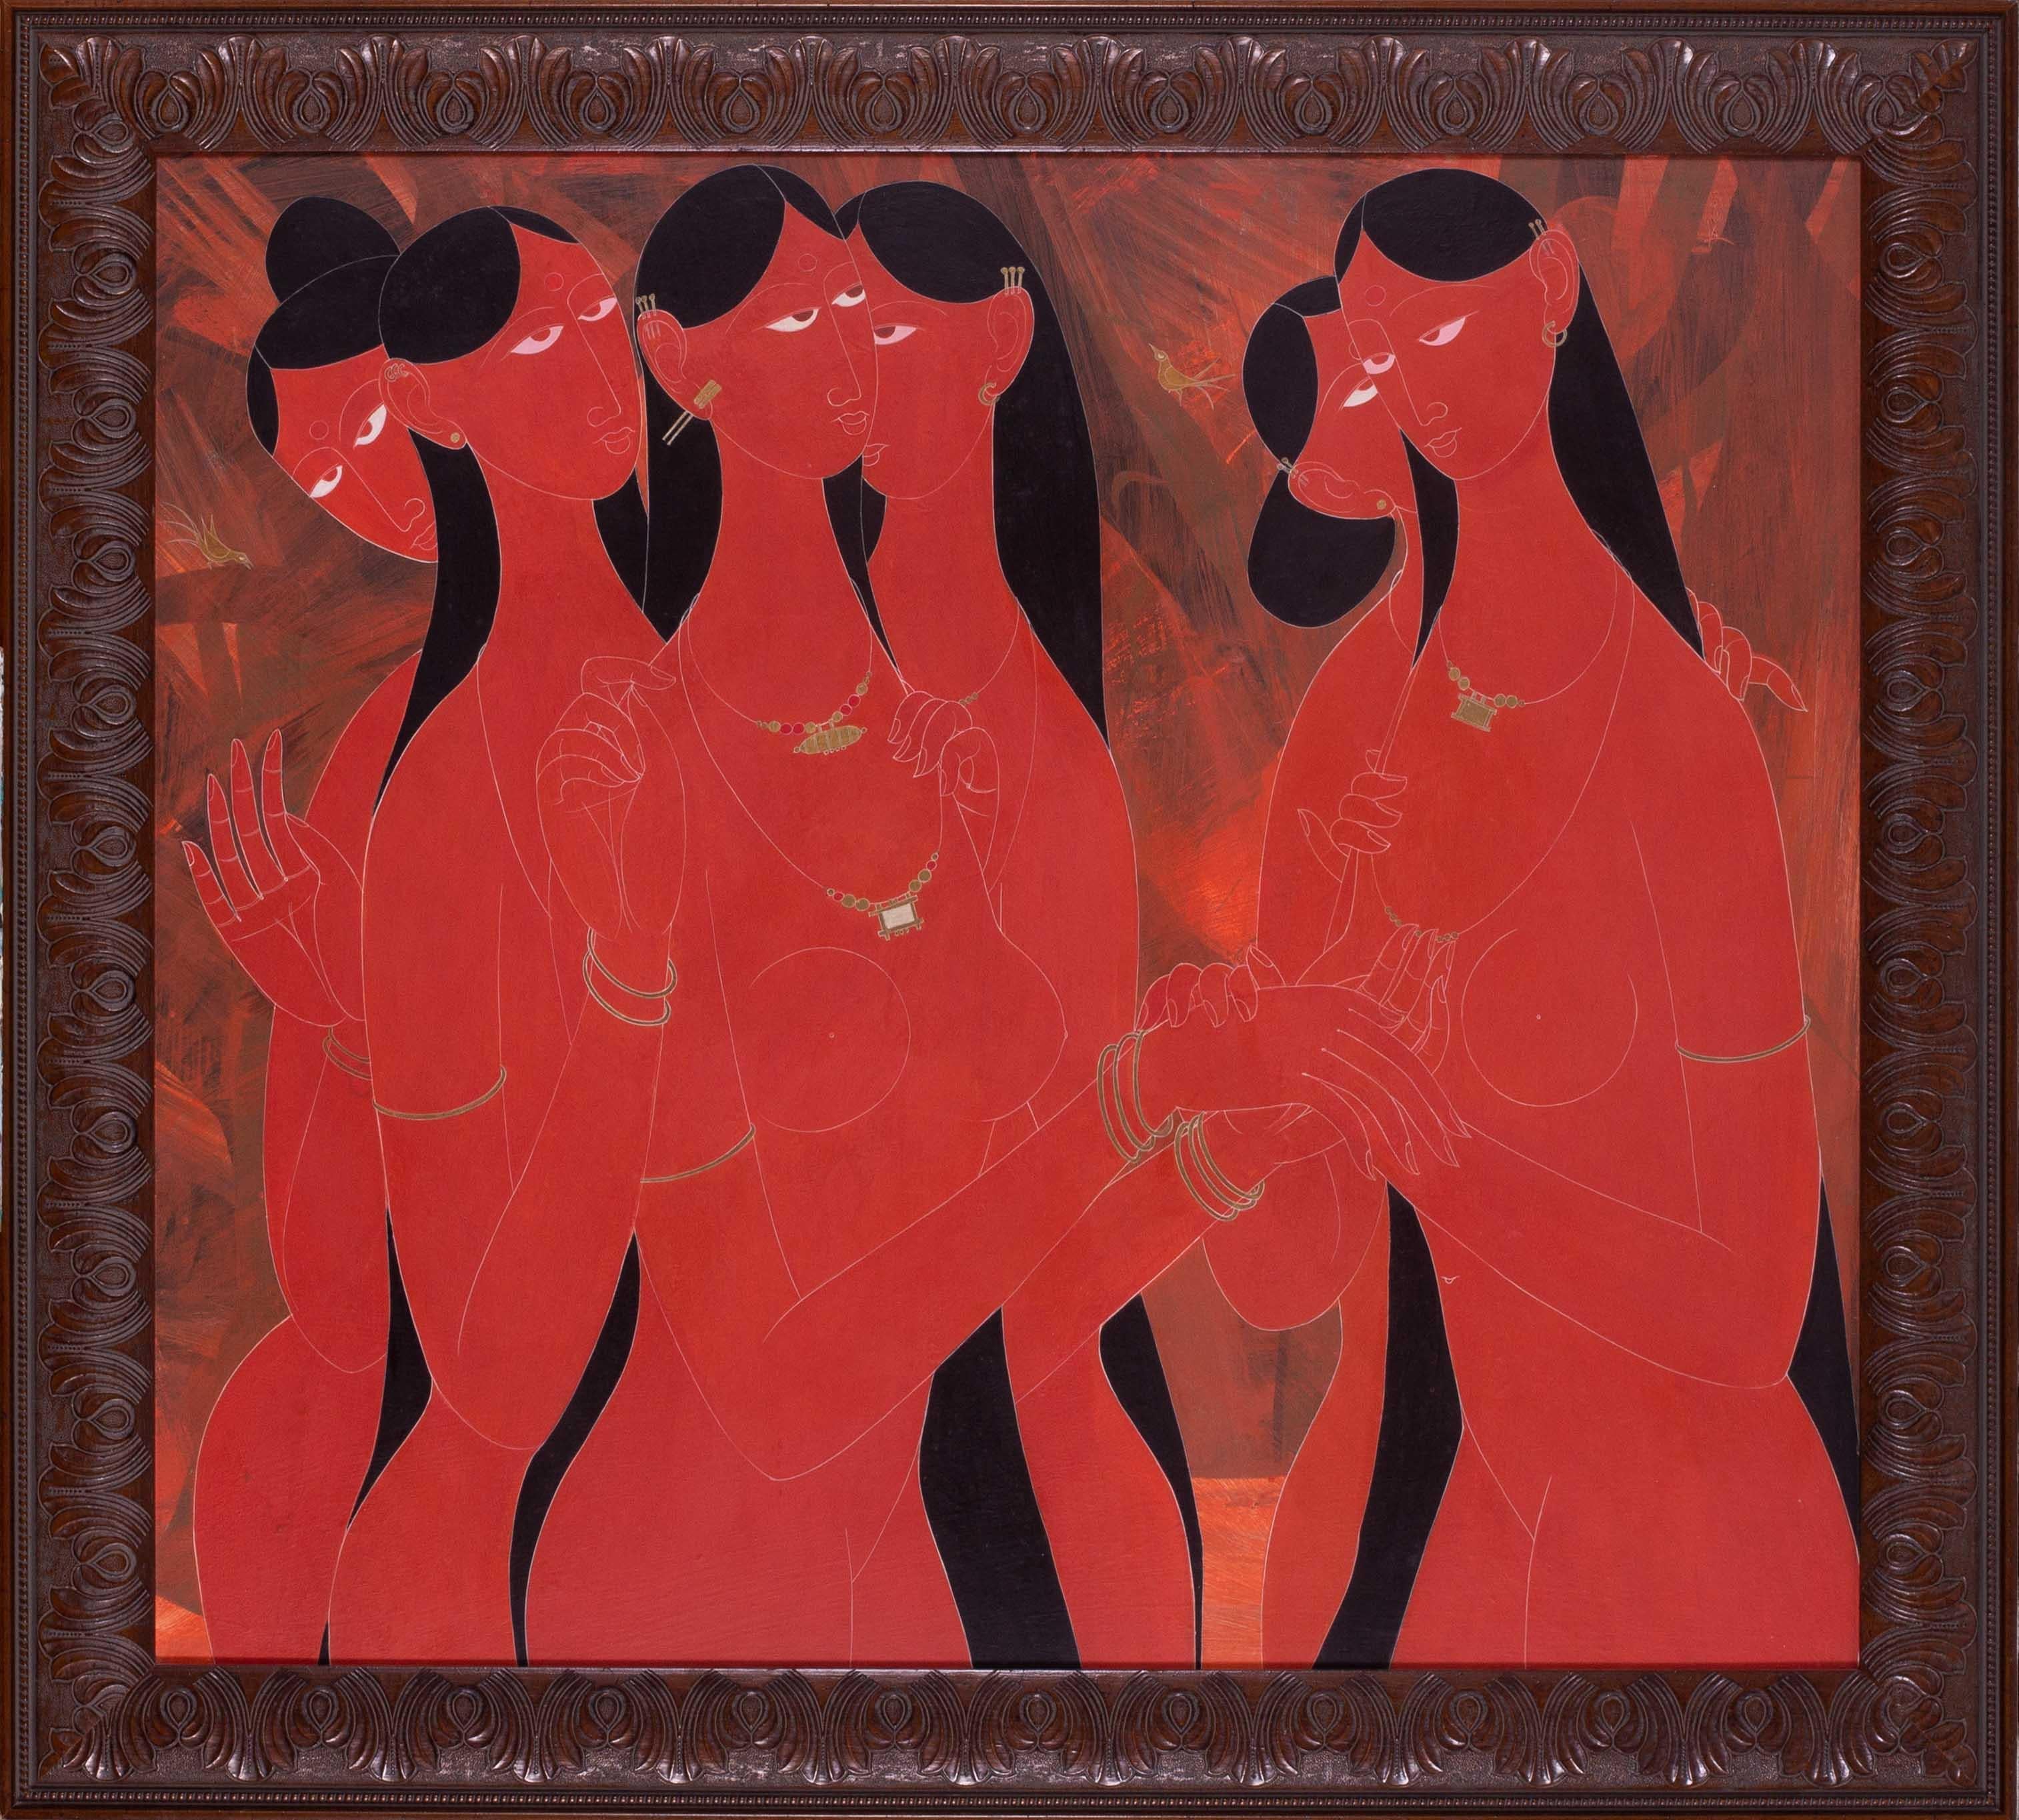 Rasik Dugashanker Rabal (Indian, 1928 – 1980)
Six standing women
Acrylic on board
Signed ‘RAVAL’ (upper right)
32 x 36 in. (81.5 x 91.5 cm.)

This is a modernistic view of six nude Indian women on a red background.  The artist's works have sold into